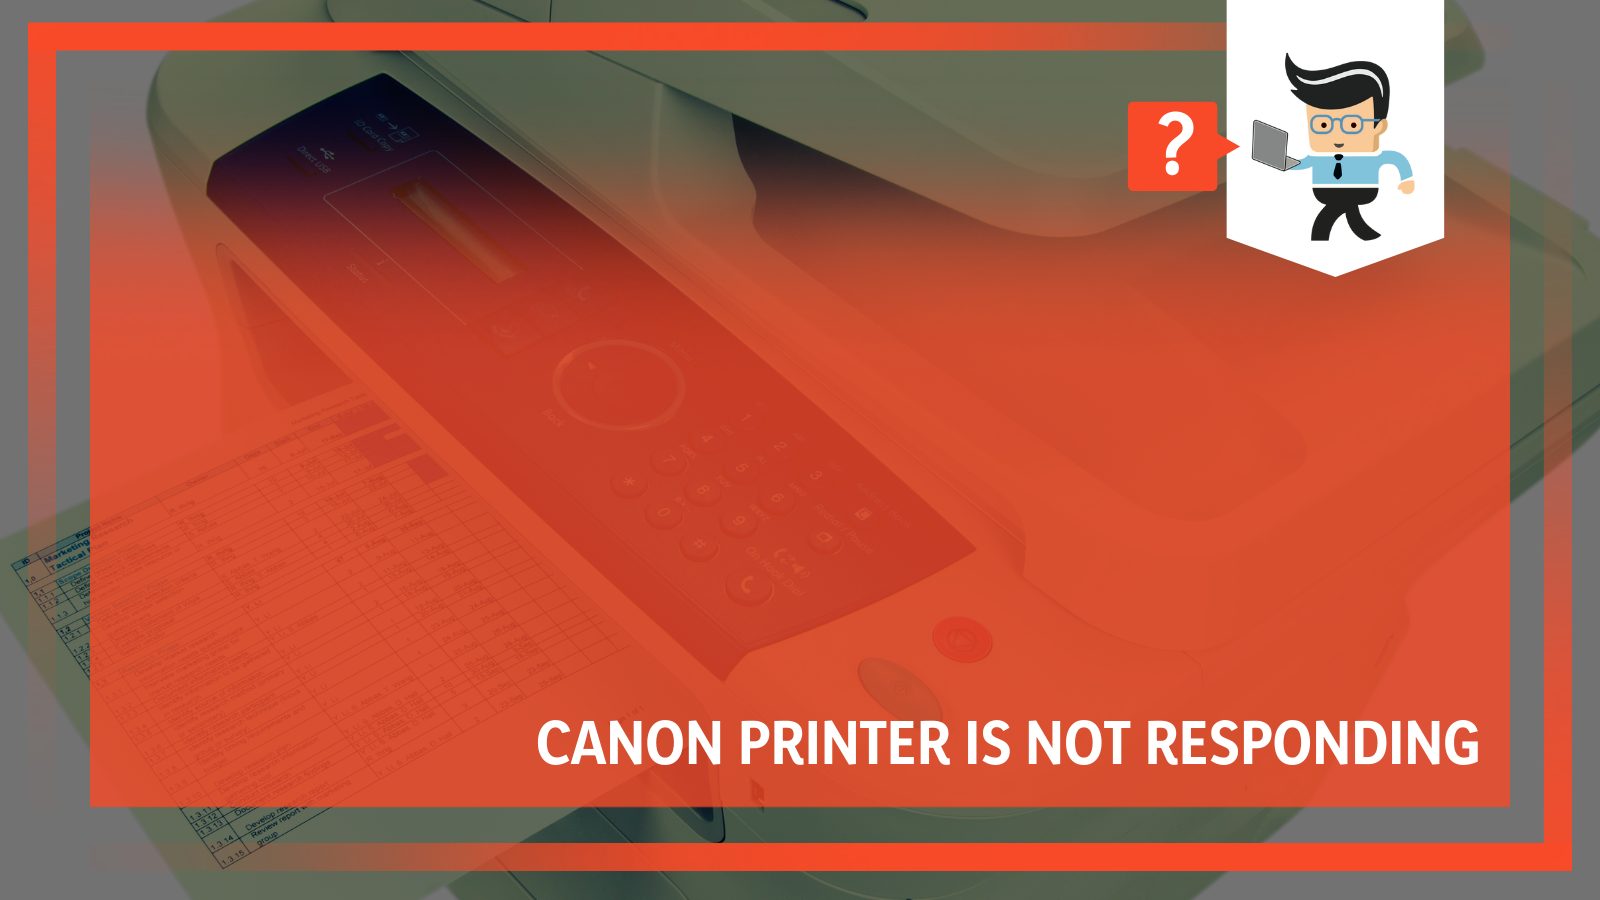 Why is canon printer not responding